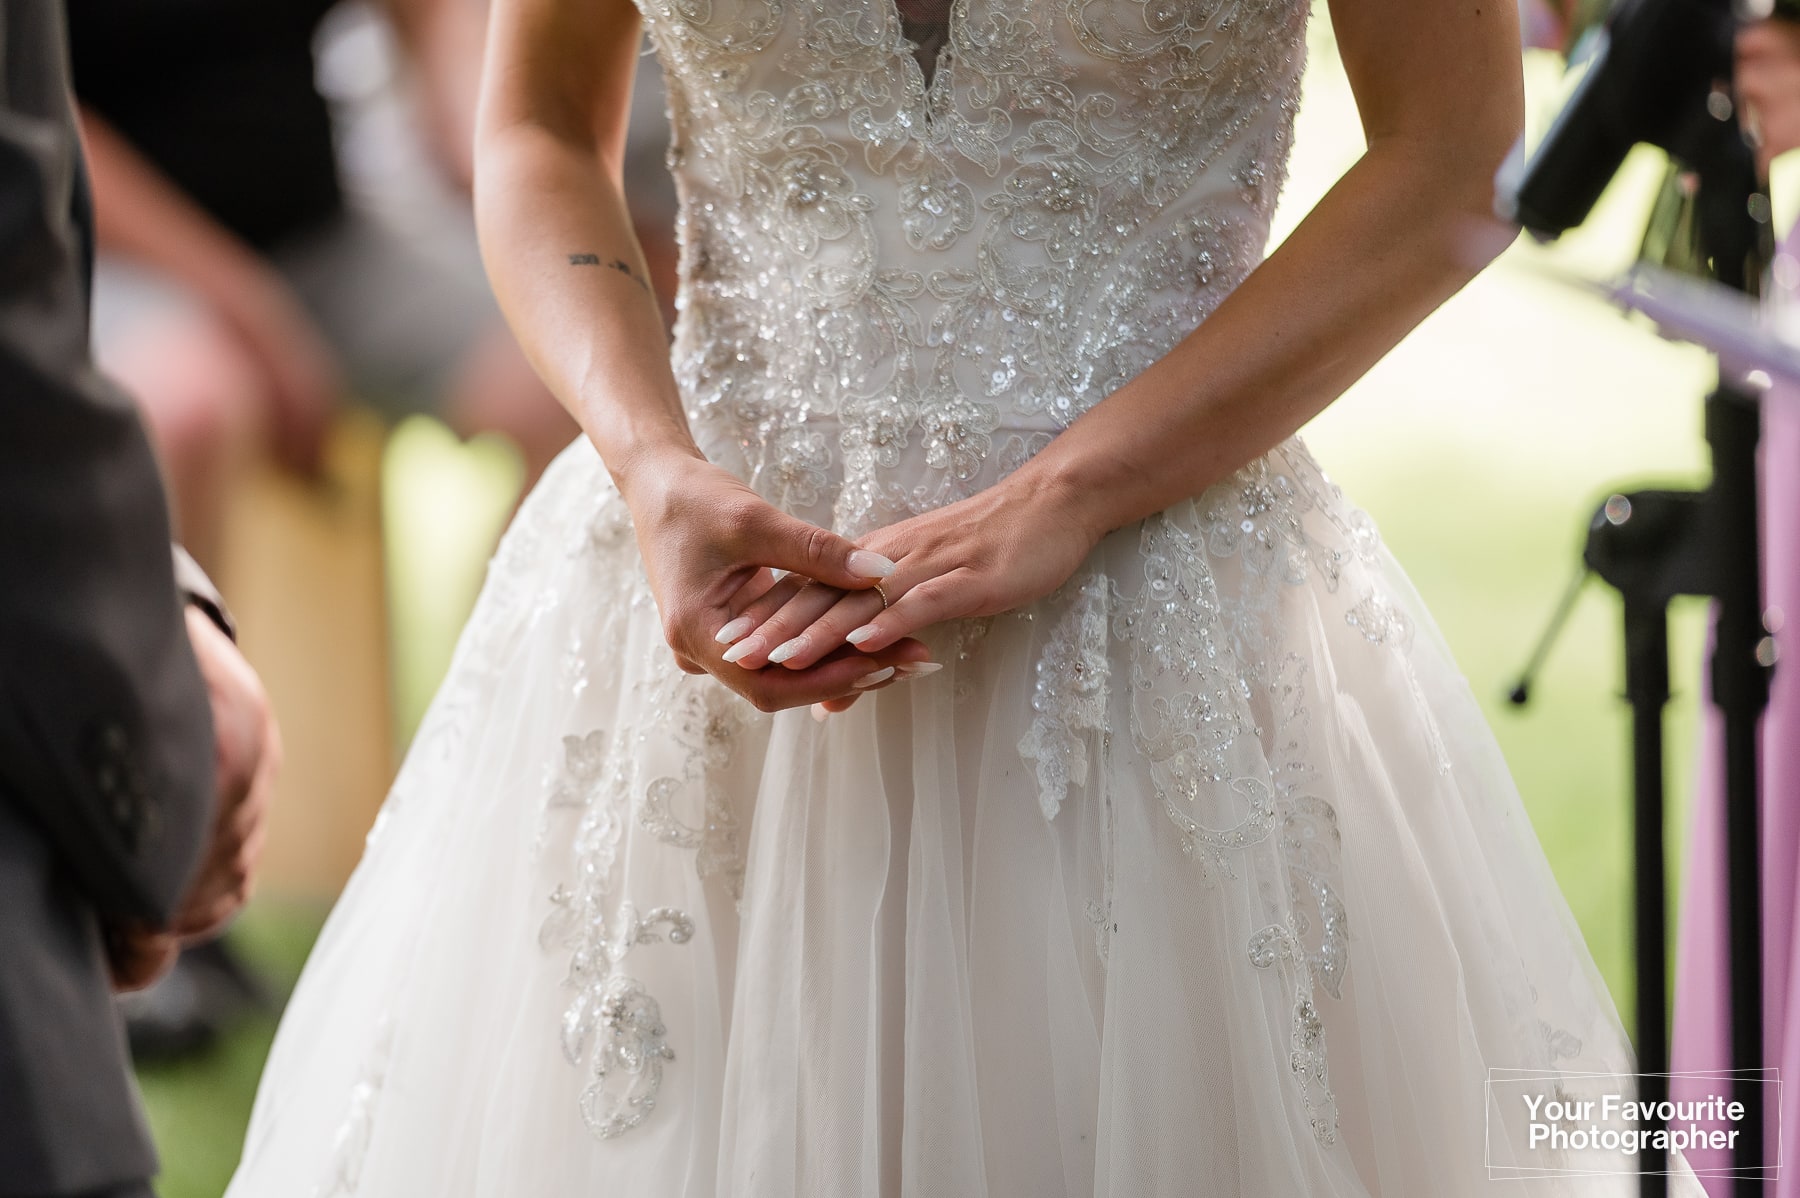 Bride's hands with wedding ring